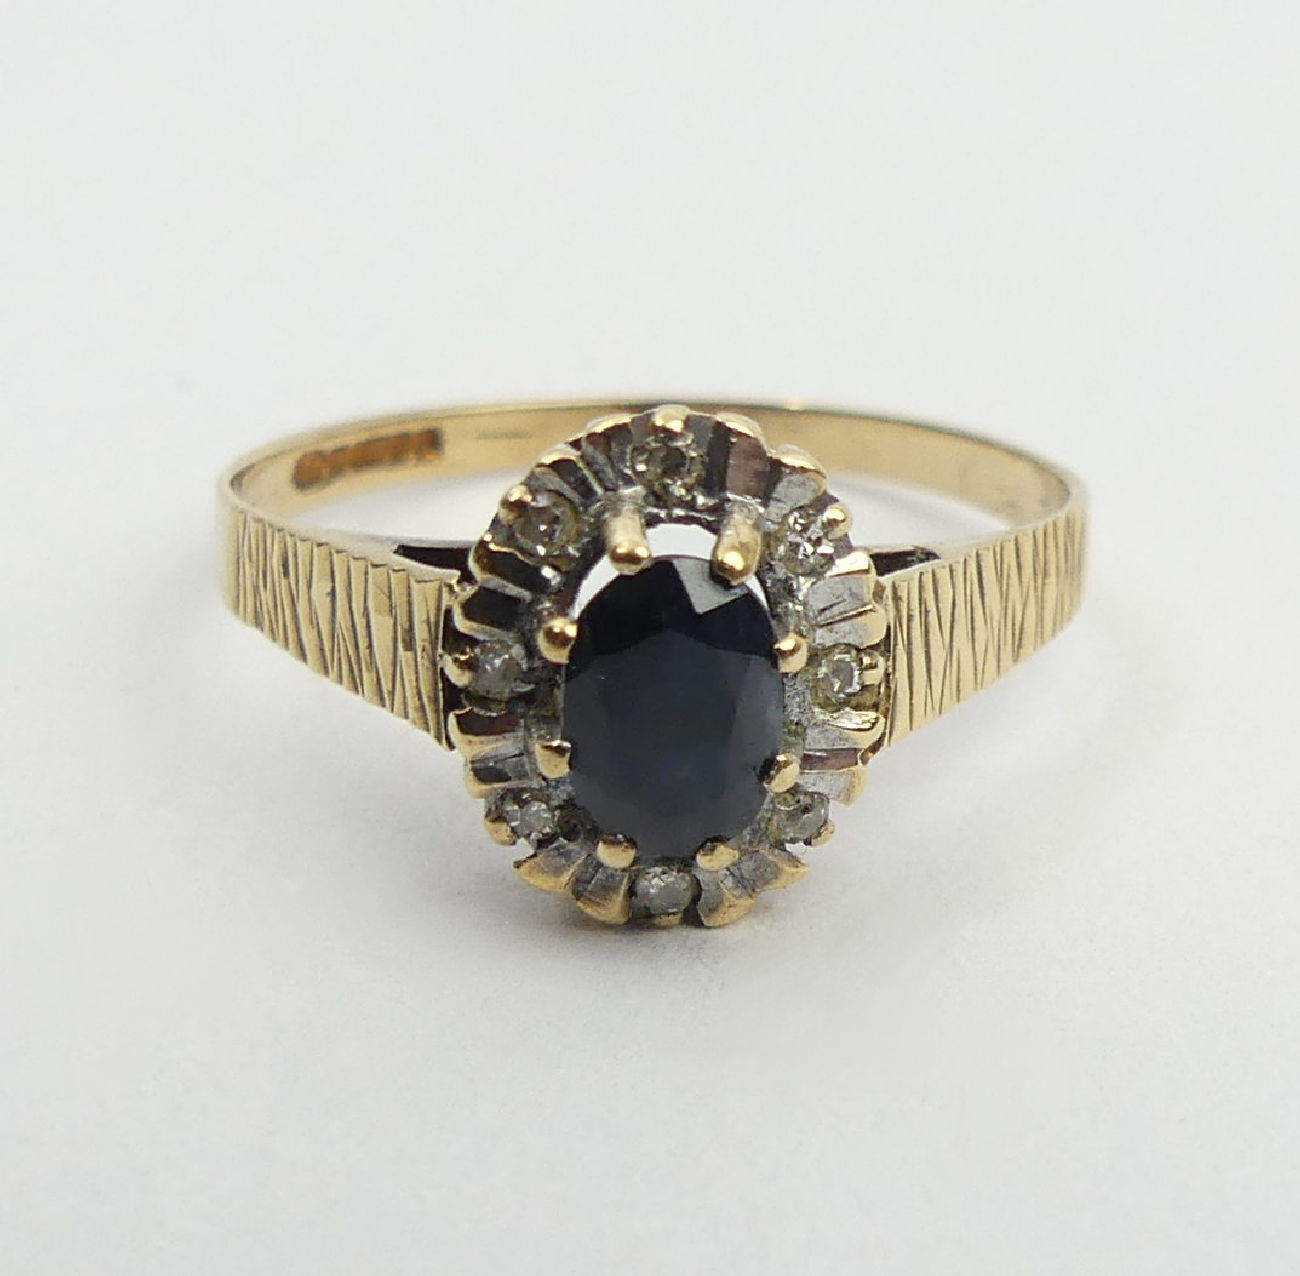 9ct gold sapphire and diamond ring, Birm. 1985, 1.8 grams, 10.2mm, size P1/2. UK postage £12. - Image 2 of 6